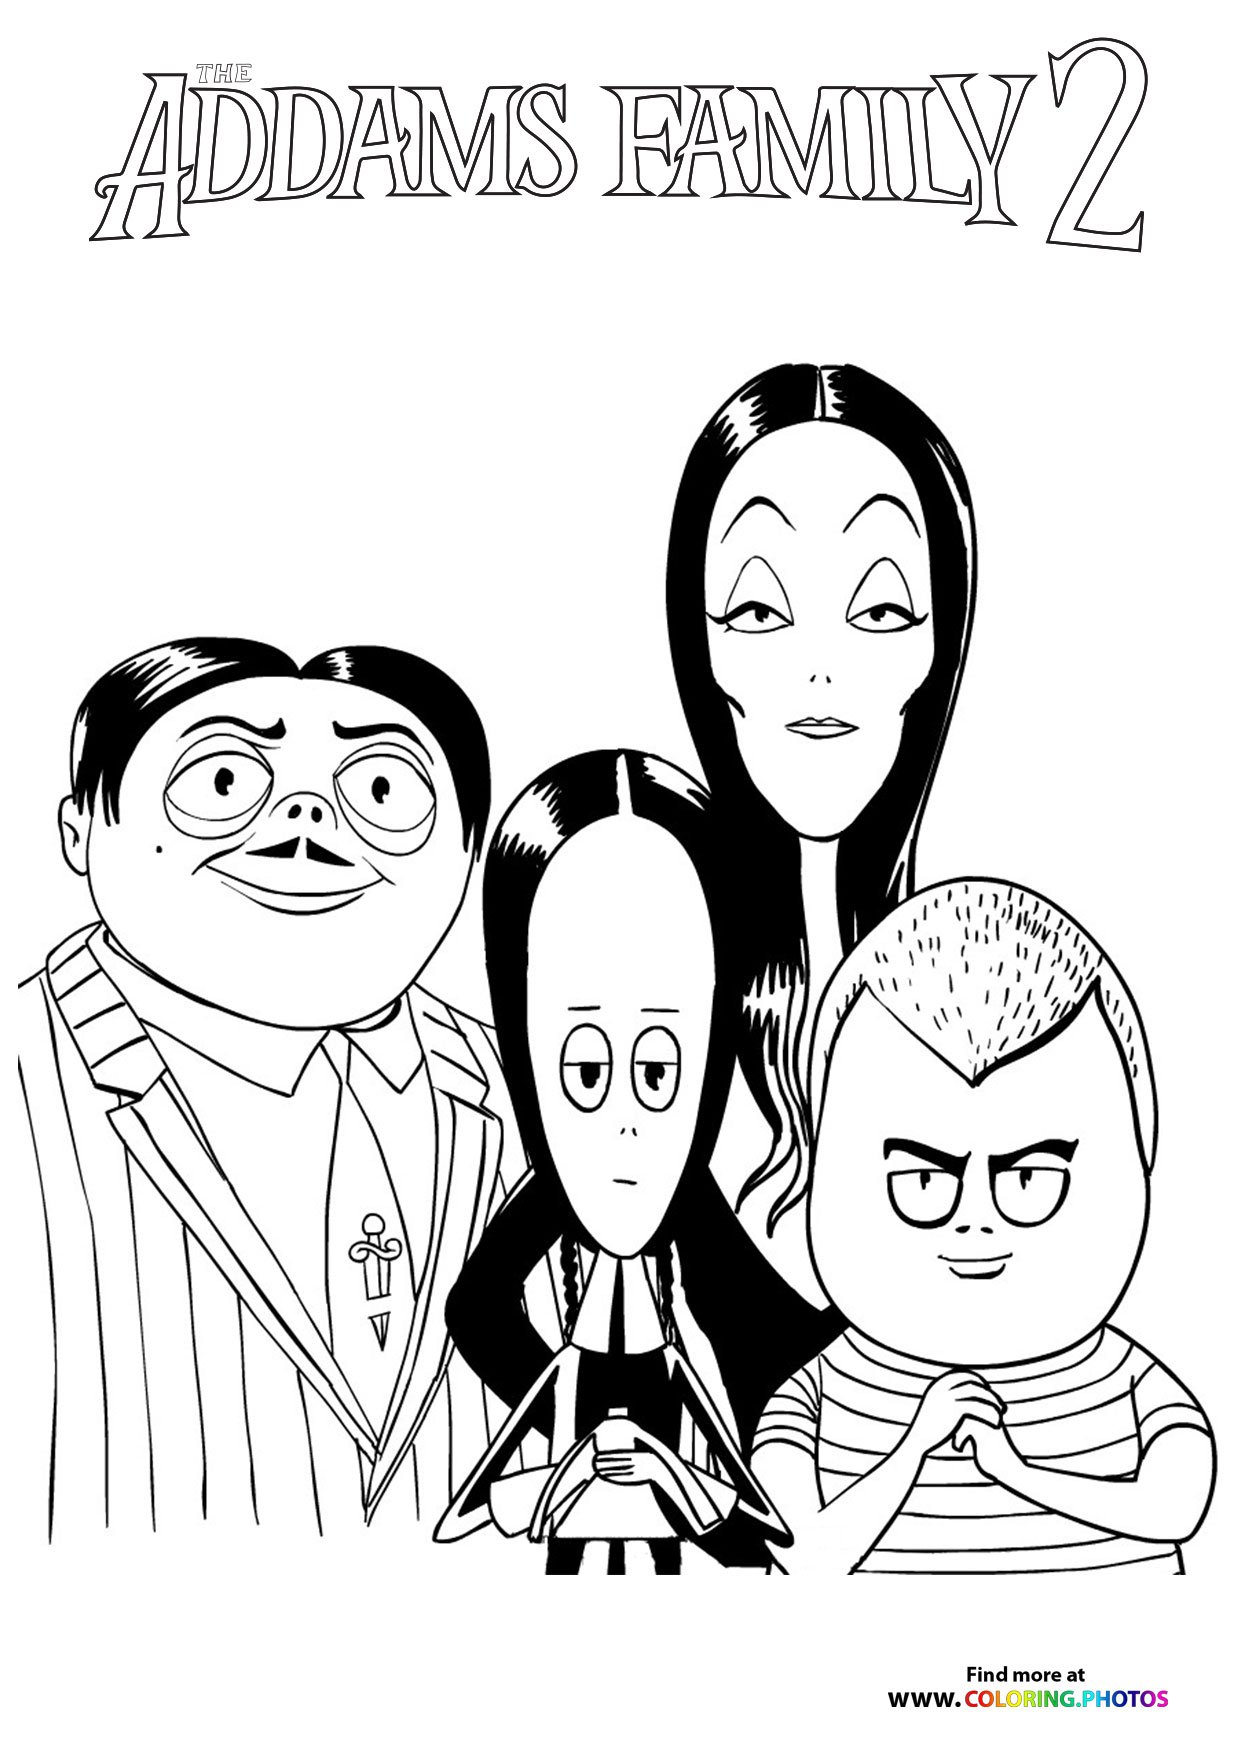 Addams family for kids #8